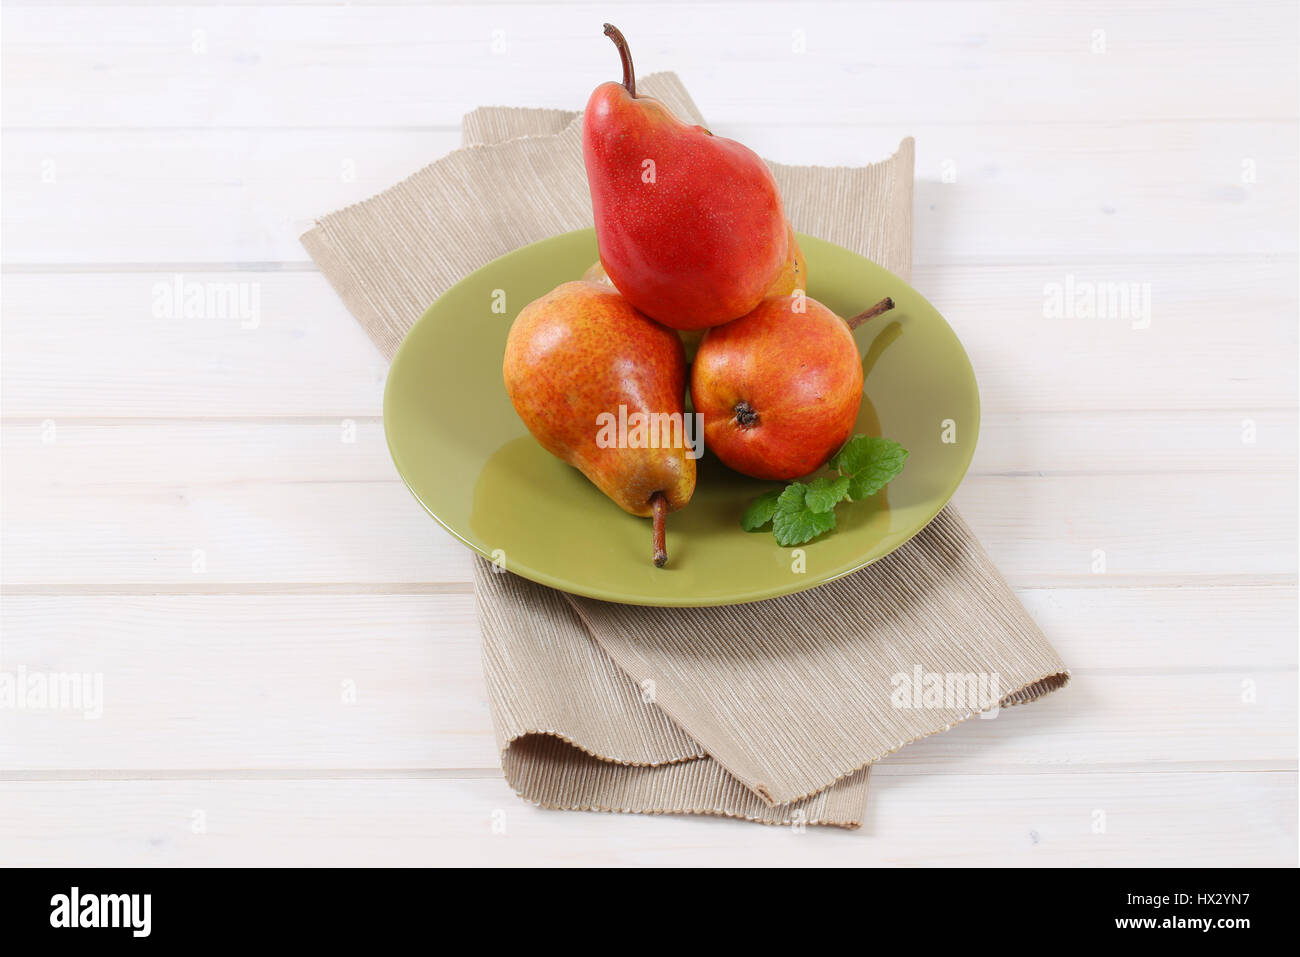 plate of ripe red pears on white background Stock Photo